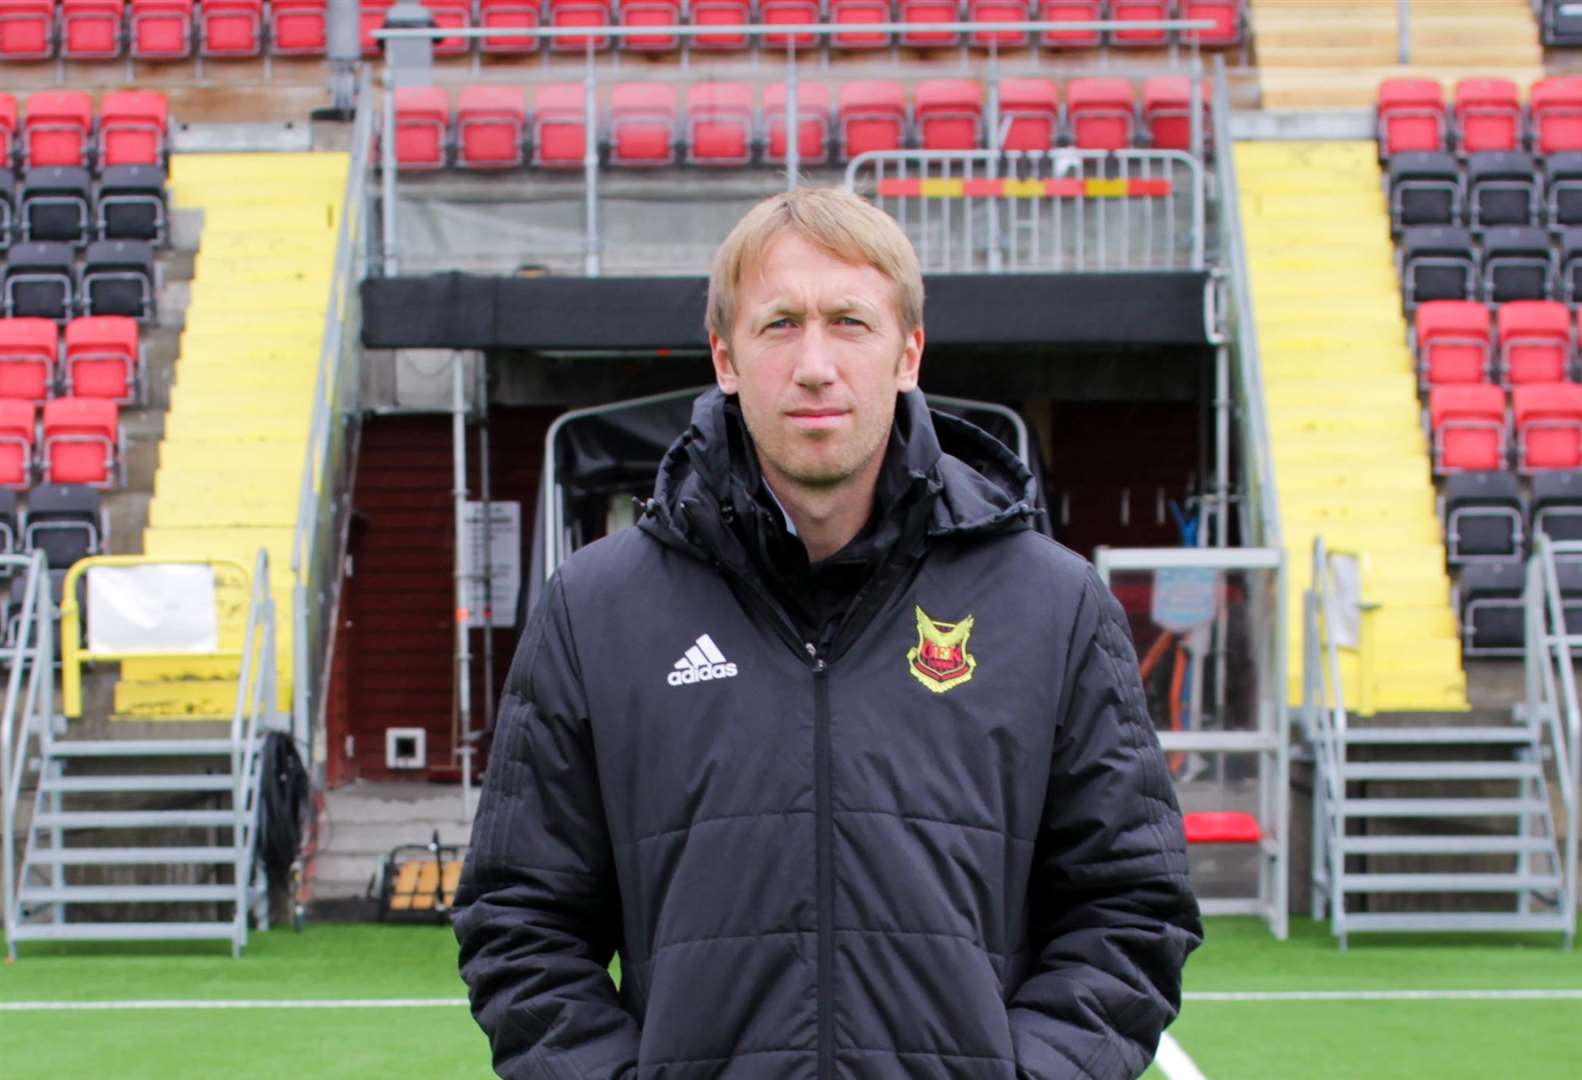 Swansea City manager Graham Potter enjoyed great success in Sweden prior to his move to the Welsh side (6747744)